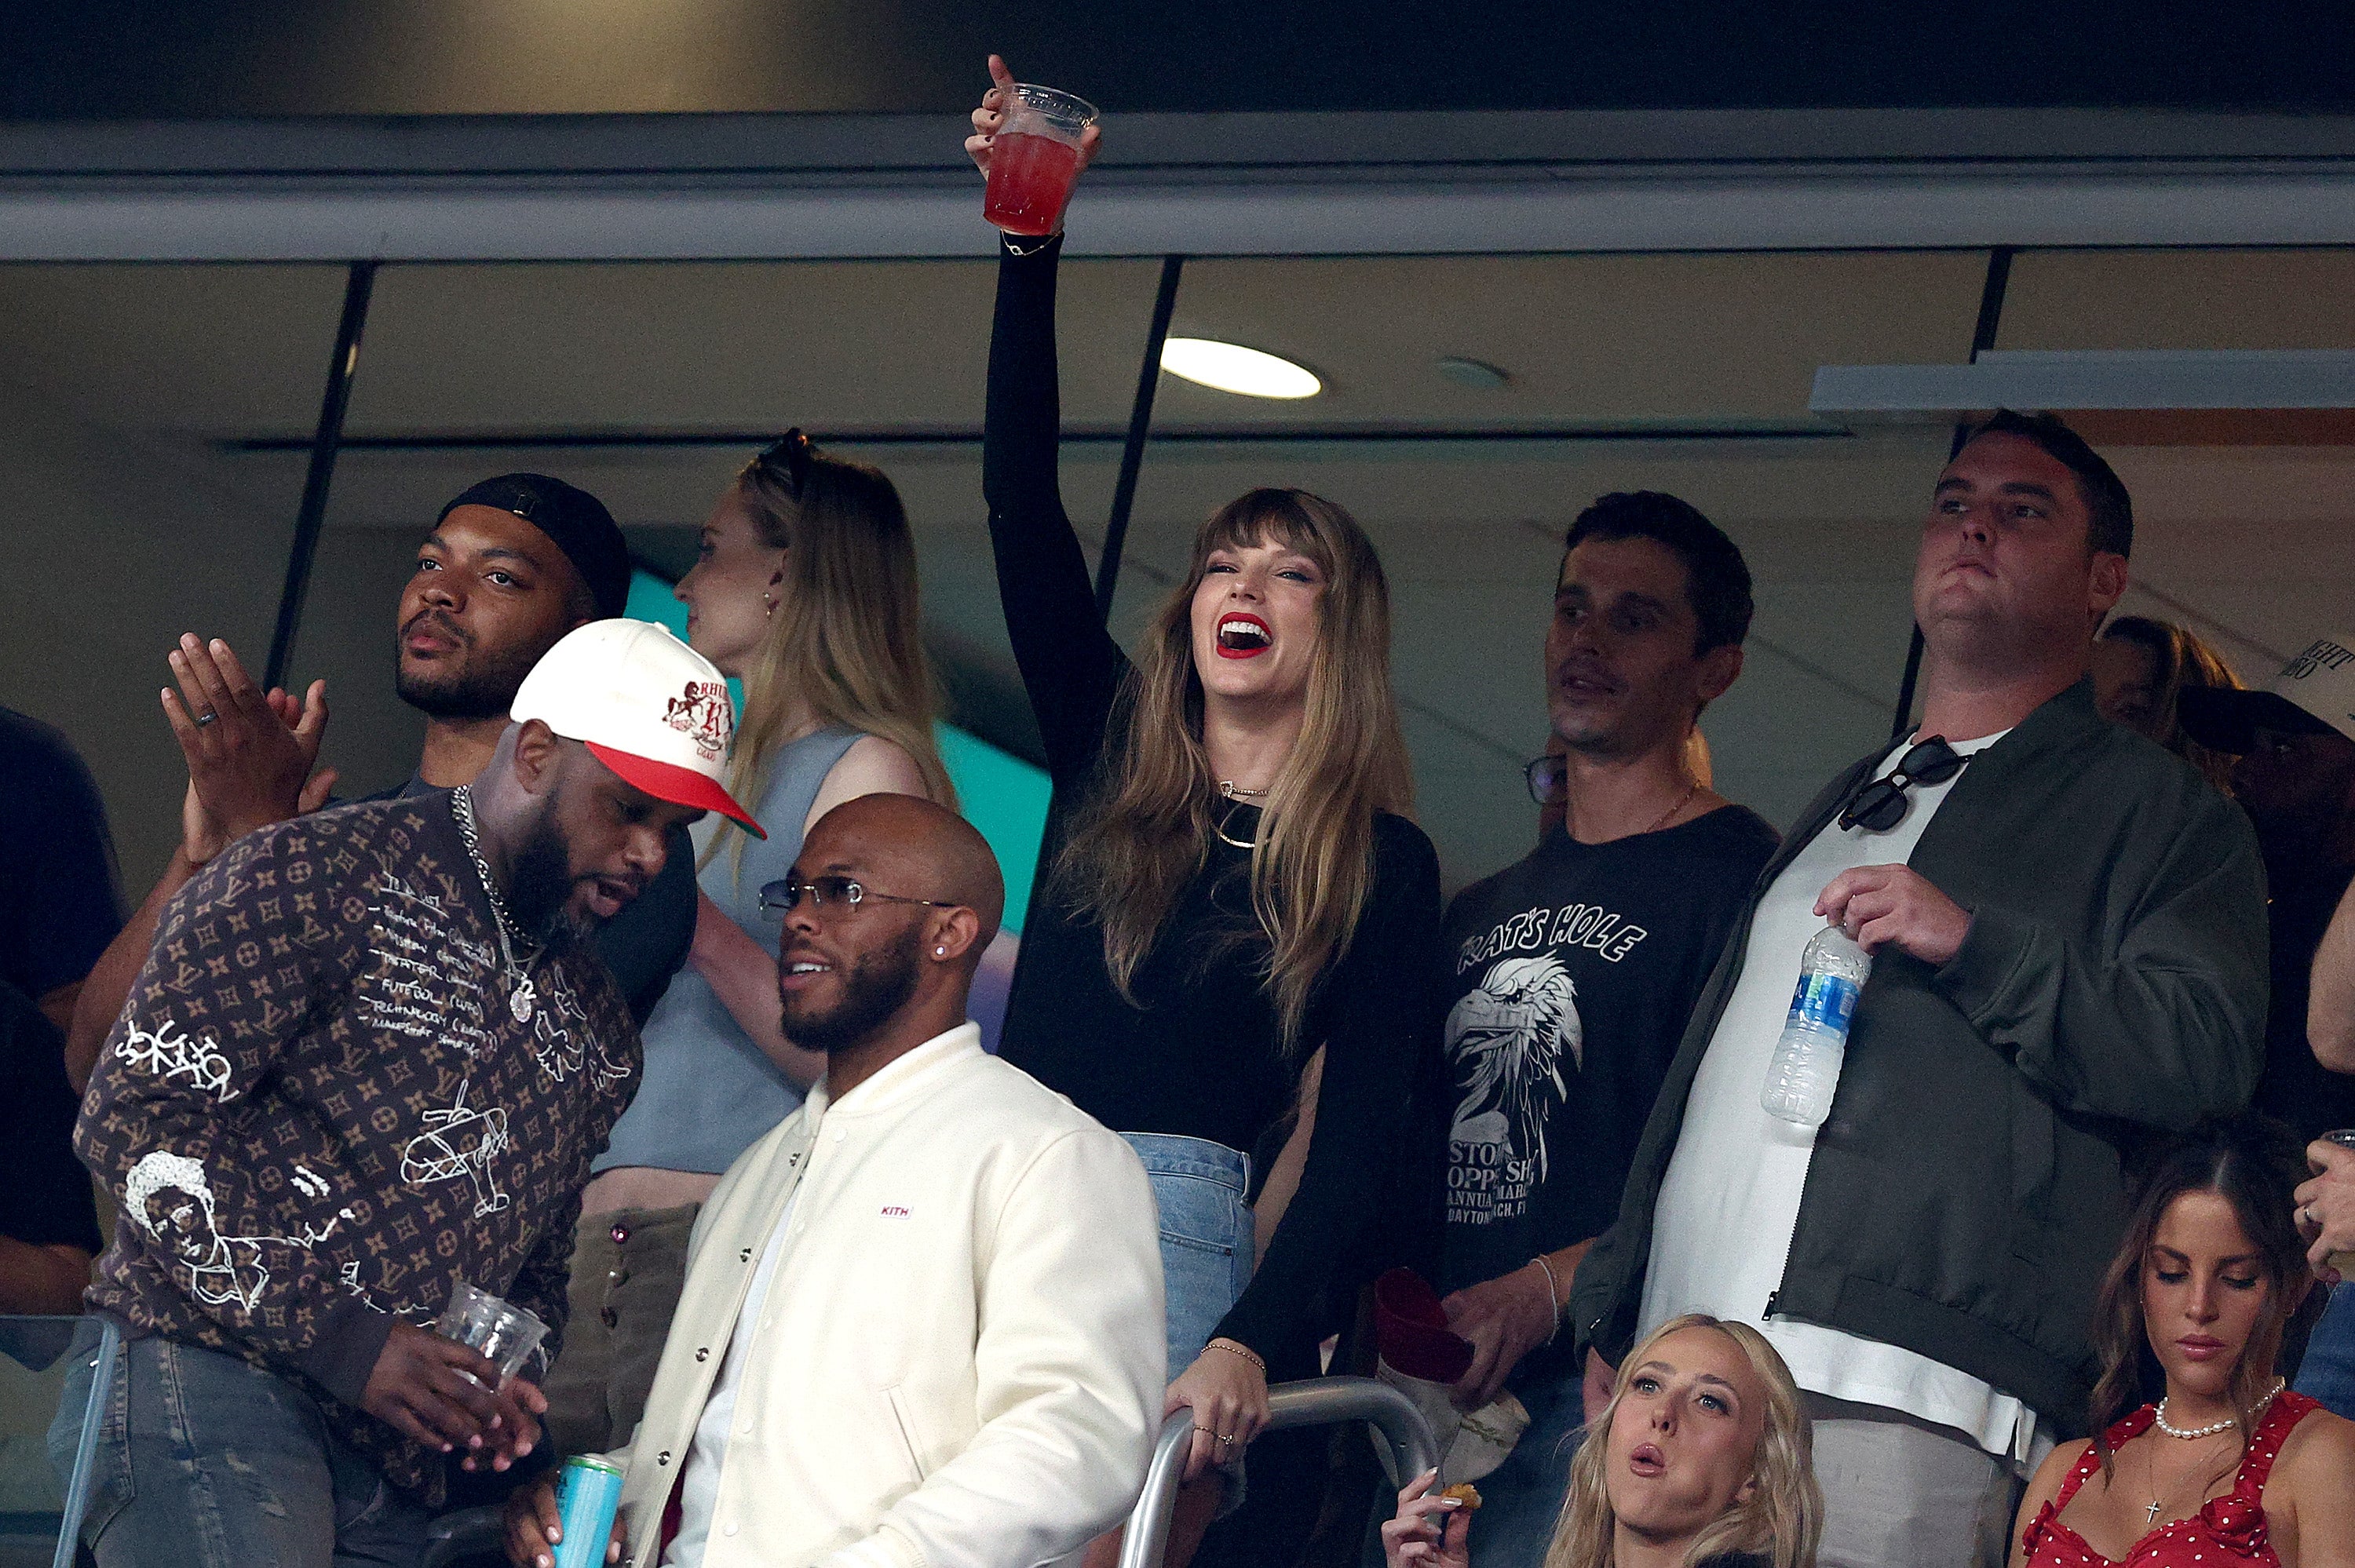 Swift cheered on Kelce’s team from the stands